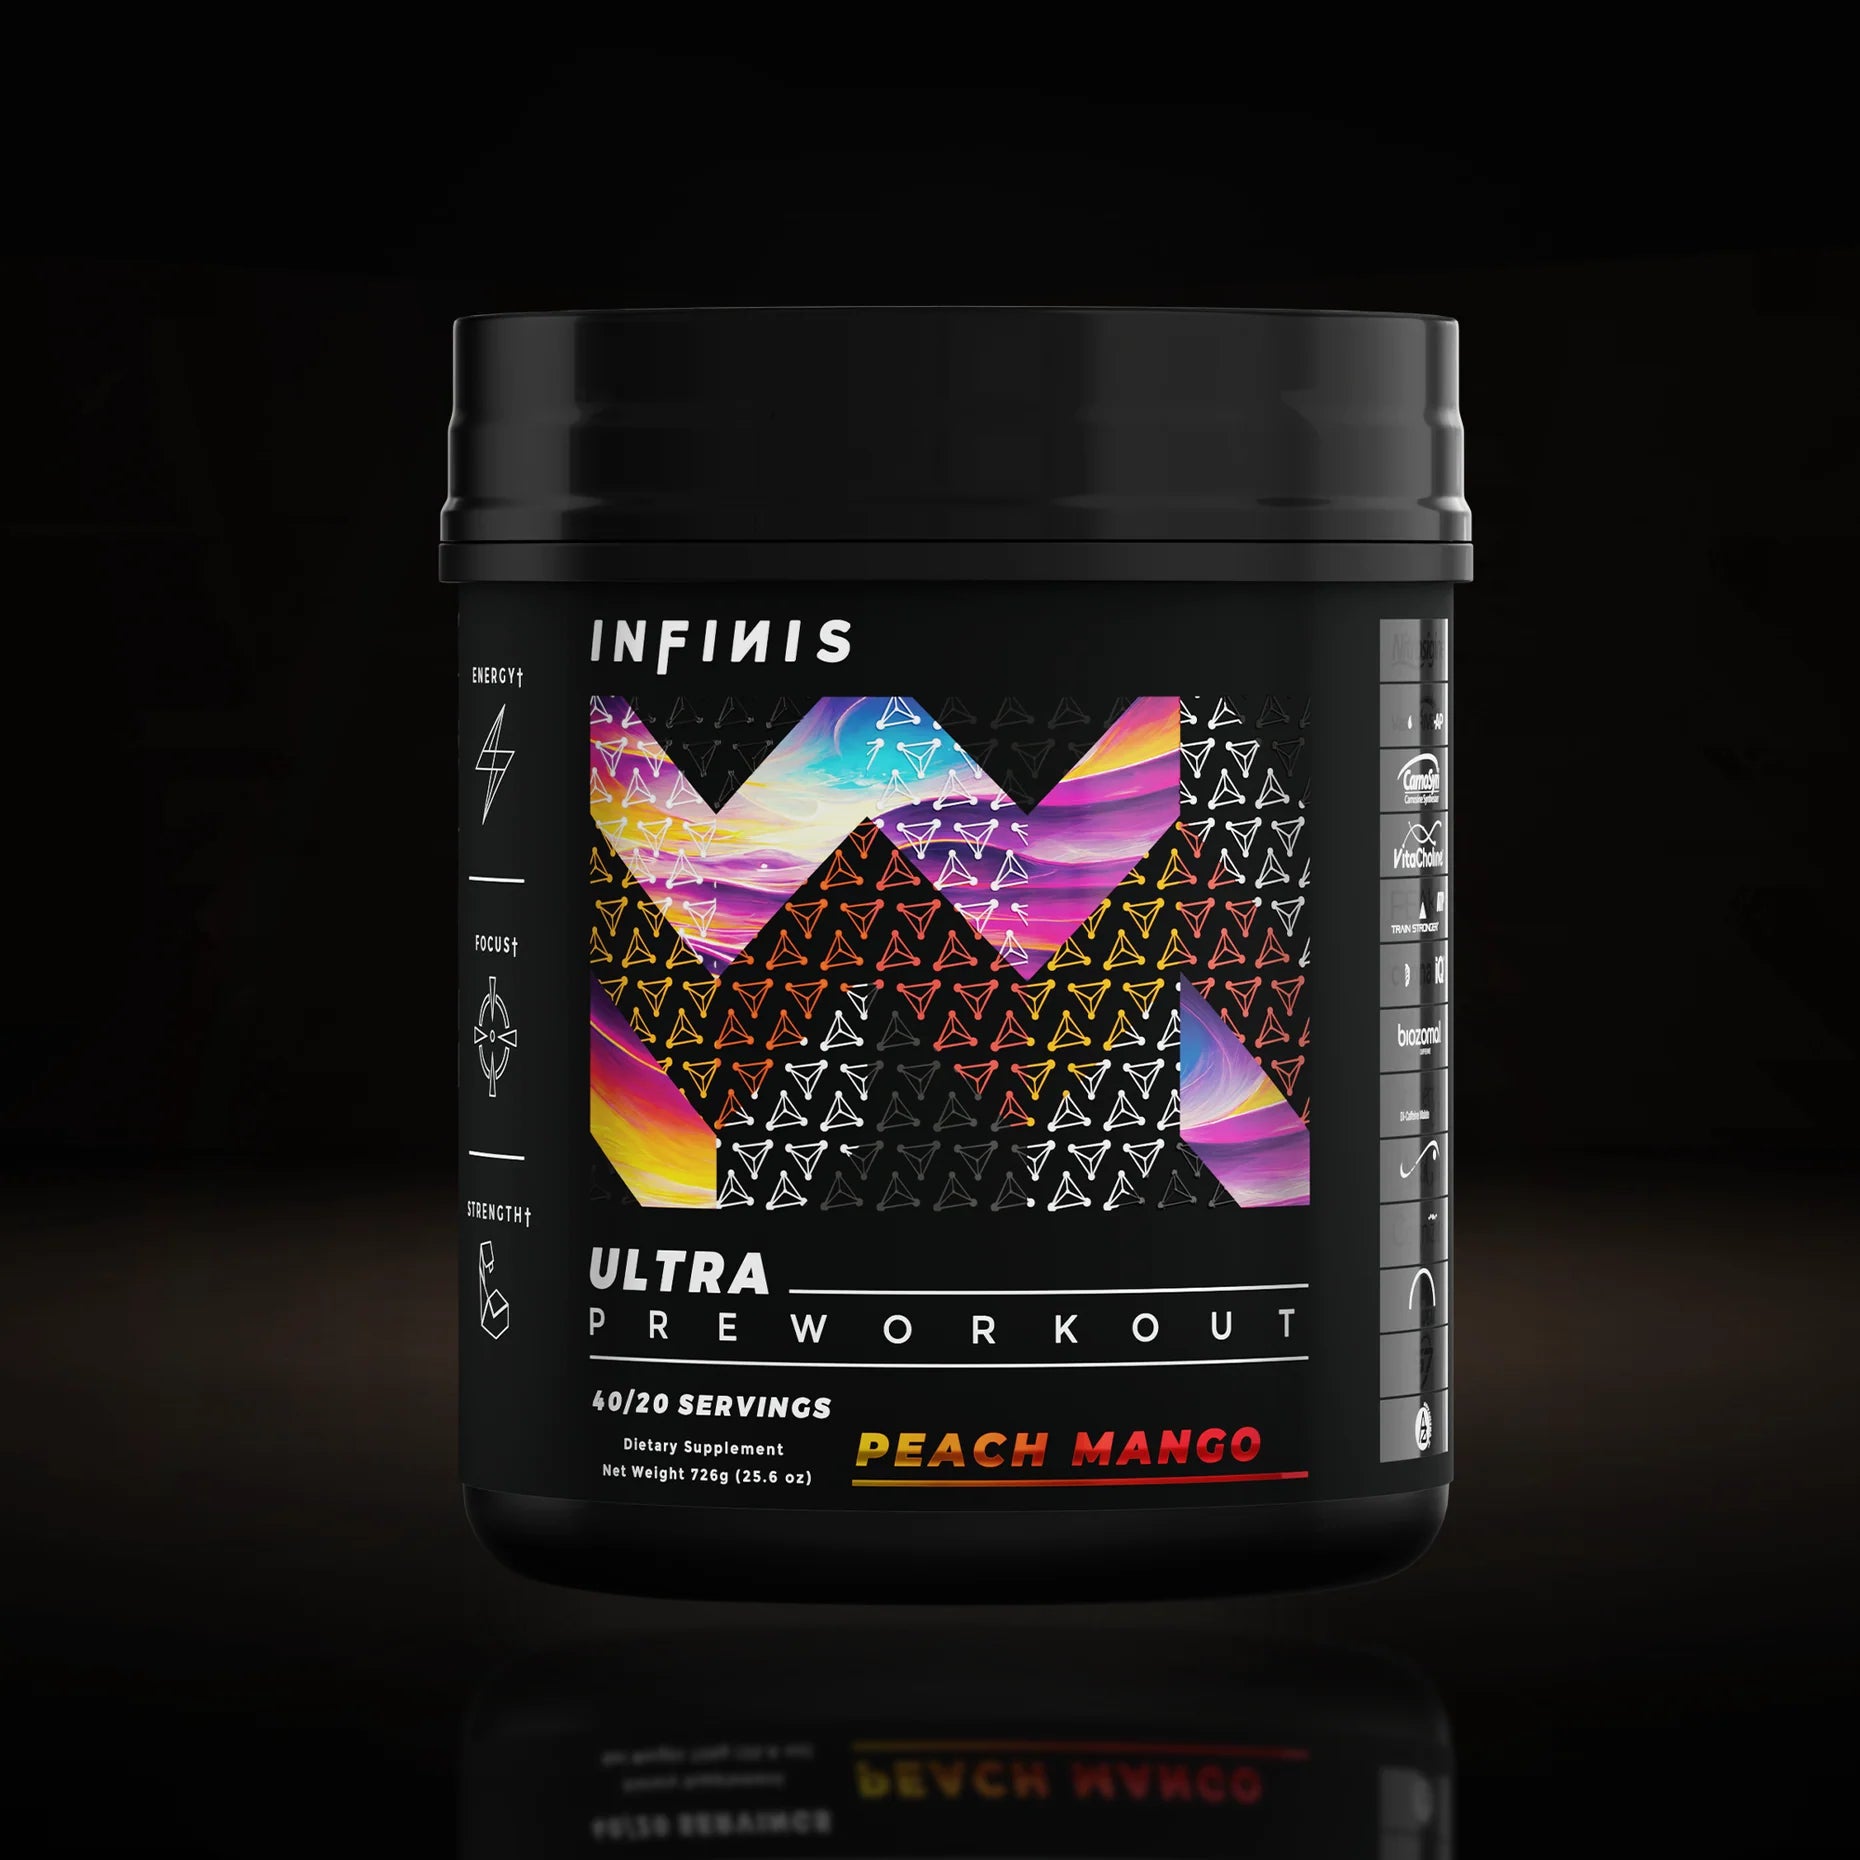 INFINIS ULTRA PRE-WORKOUT